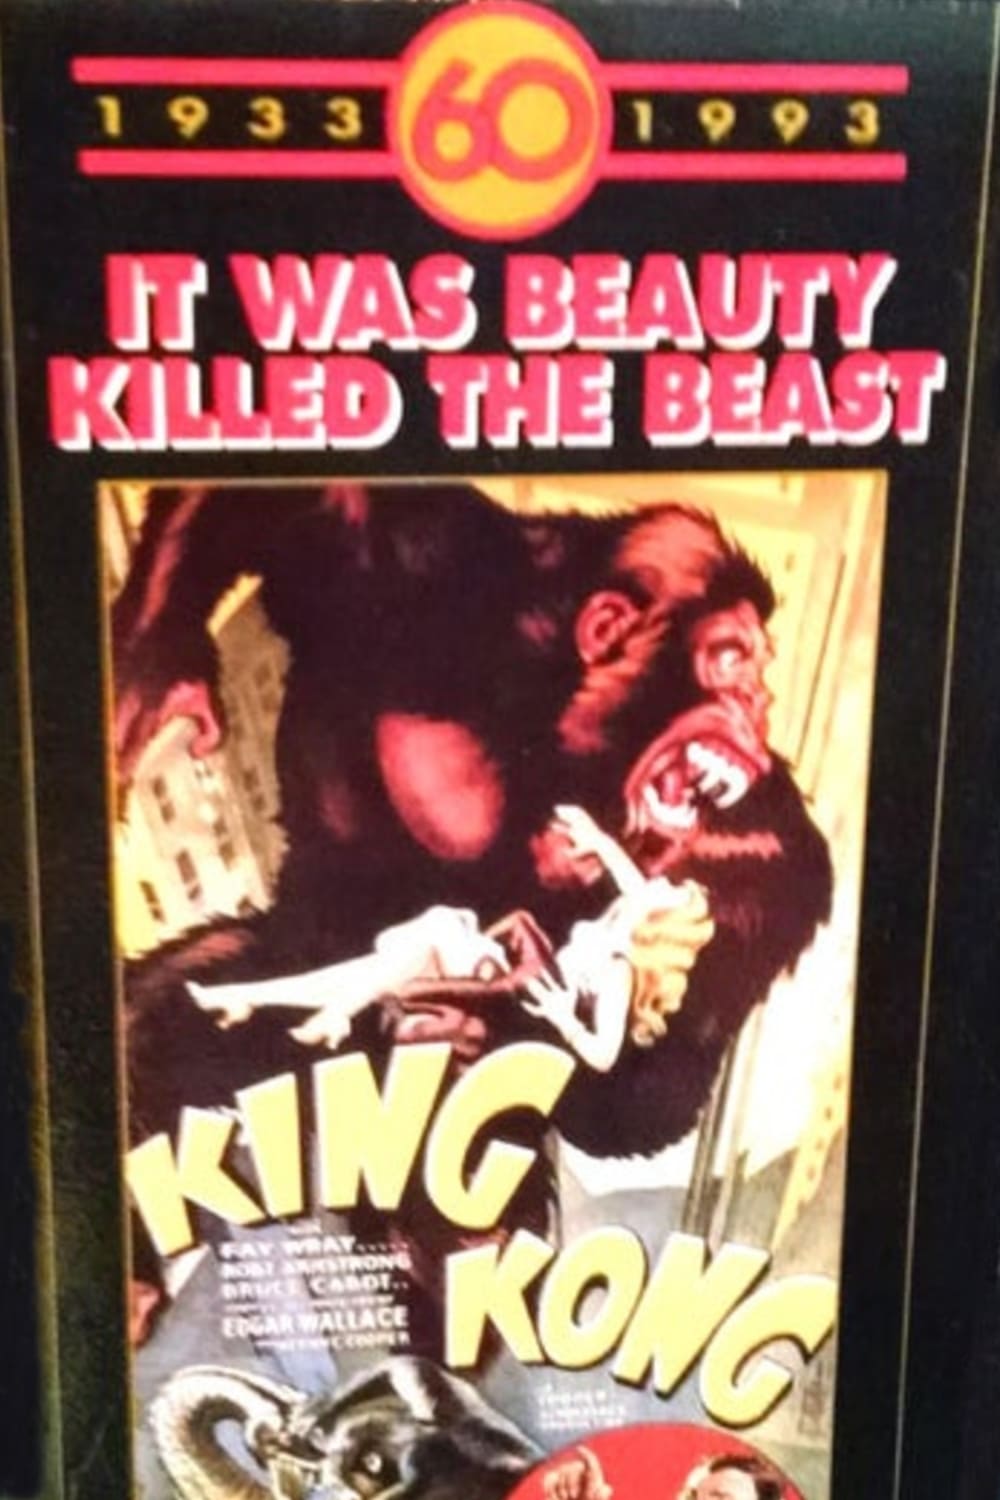 King Kong 60th Anniversary Special: "It was beauty killed the beast."